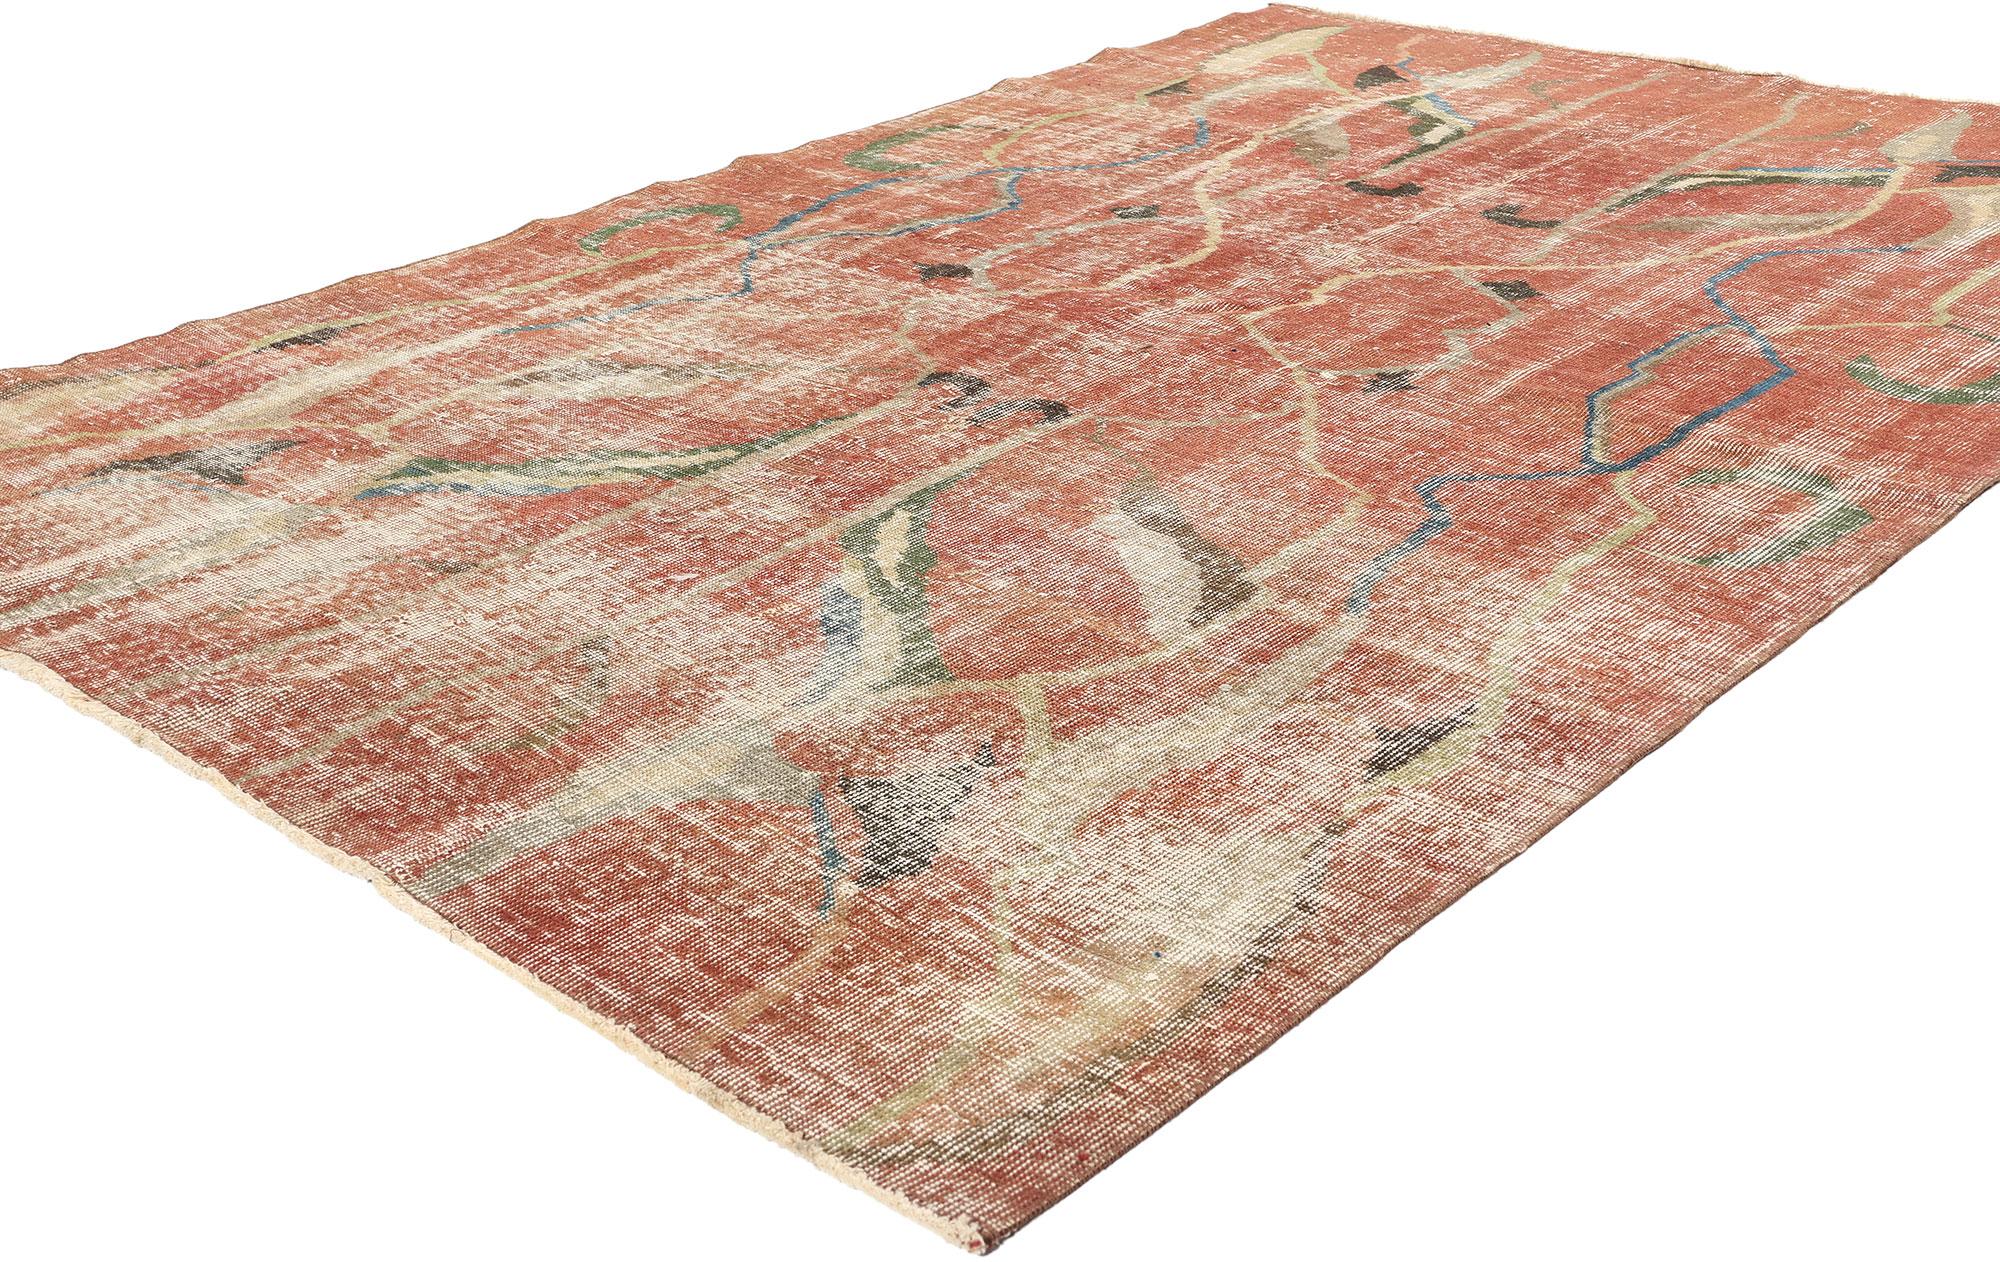 52004 Zeki Muren Vintage Turkish Sivas Rug, 05'04 x 08'00. Nestled within the serene landscapes of Turkey's Sivas region, Zeki Muren Turkish Sivas rugs pay homage to the esteemed Turkish singer who lends them their name. Renowned for their